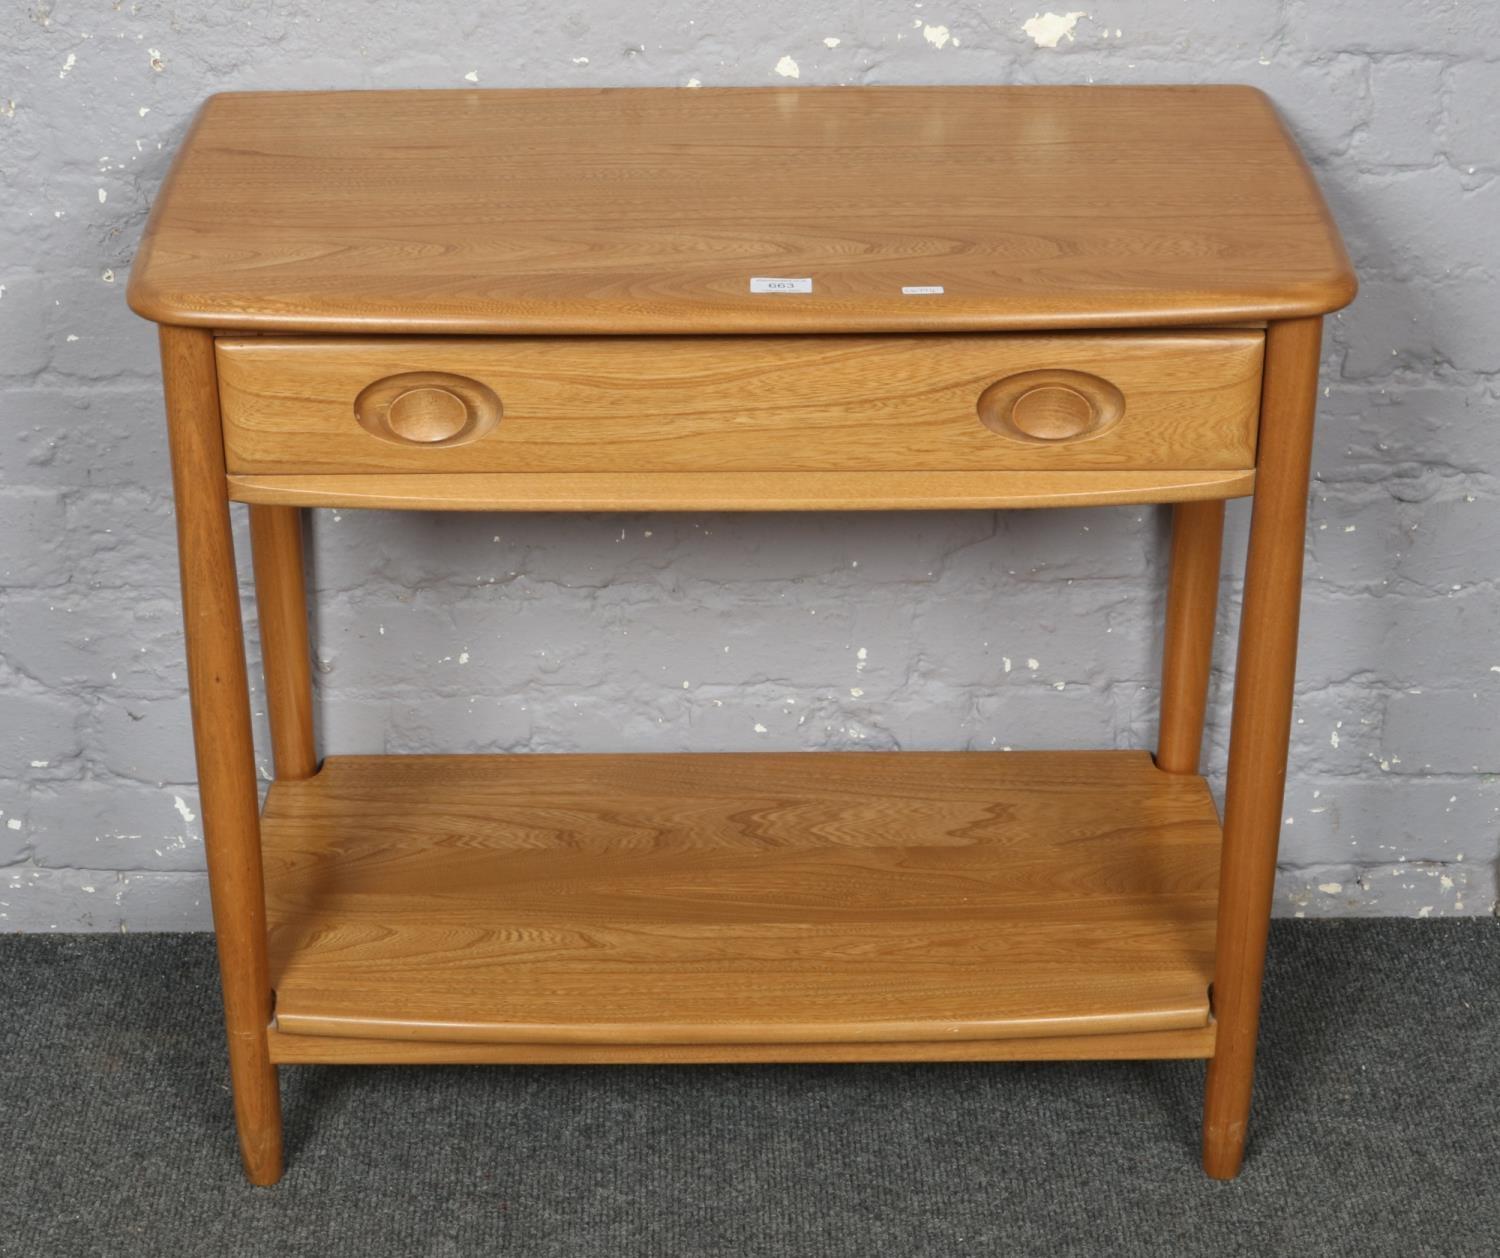 A golden dawn Ercol two tier side table with drawer. Minor scratches to under tier.